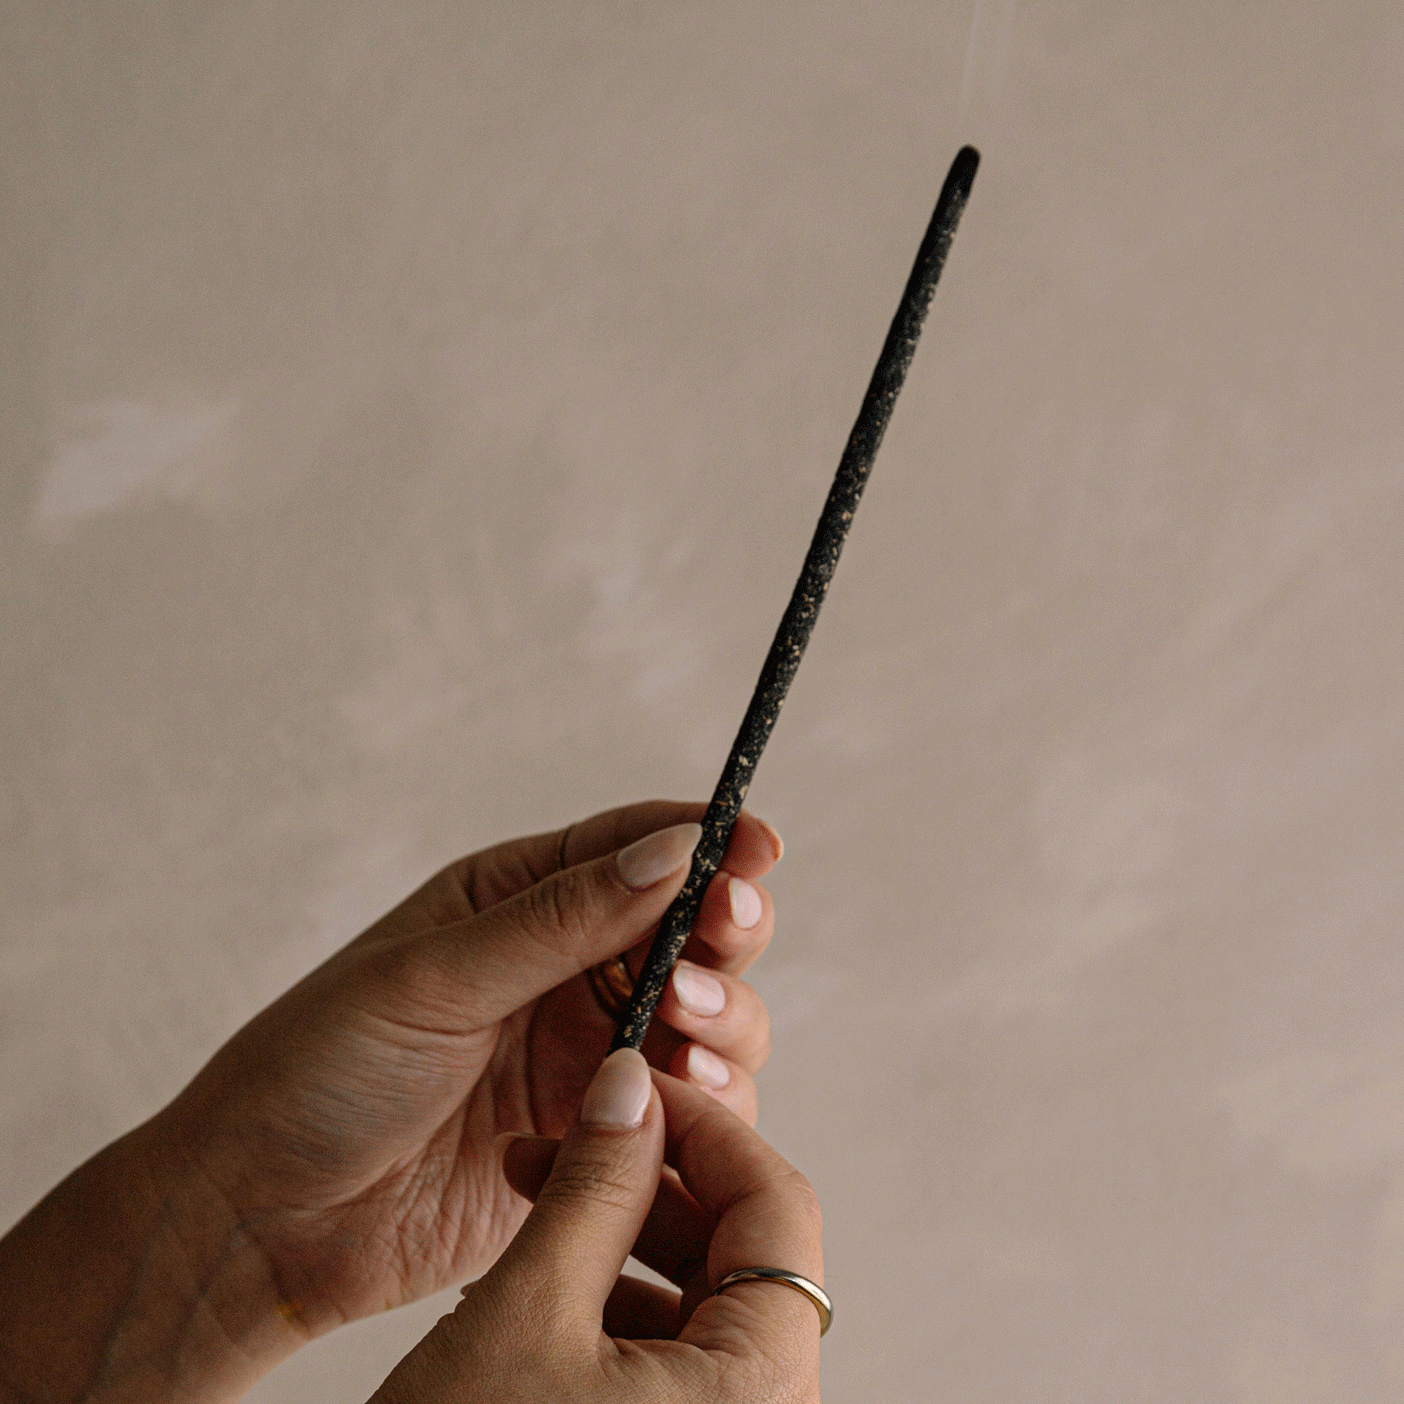 A gif telling how to burn incense stick.